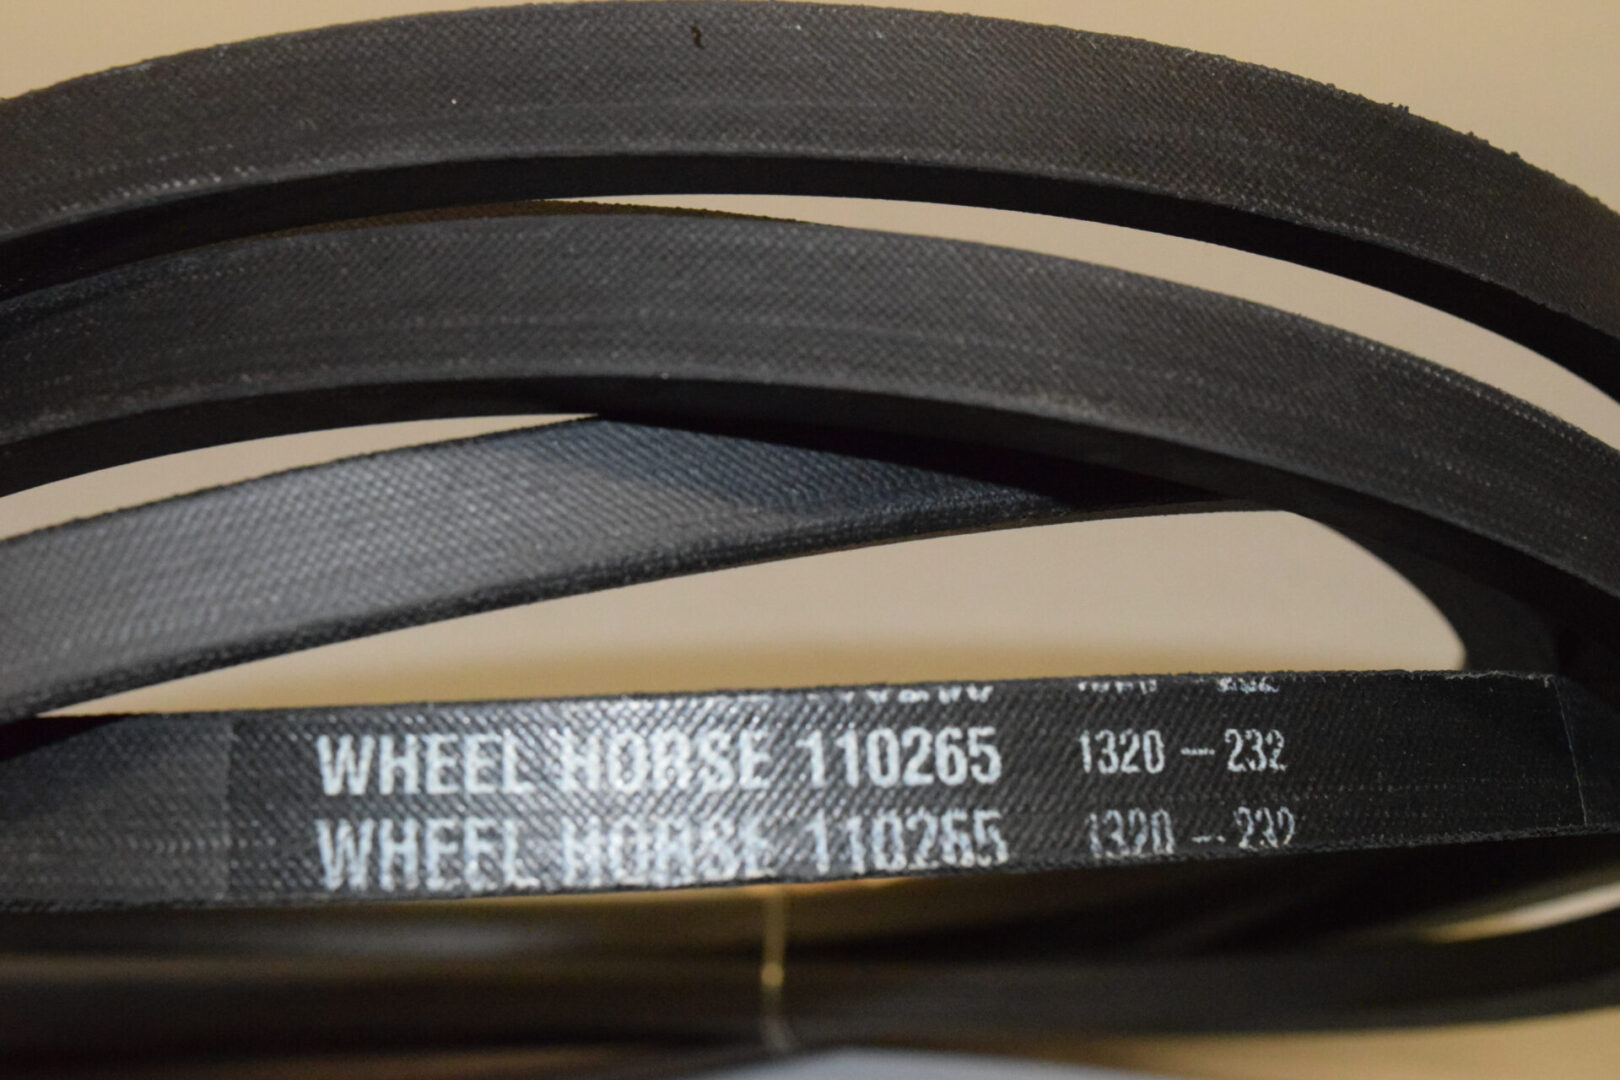 TORO or WHEEL HORSE 112-0301 made with Kevlar Replacement Belt